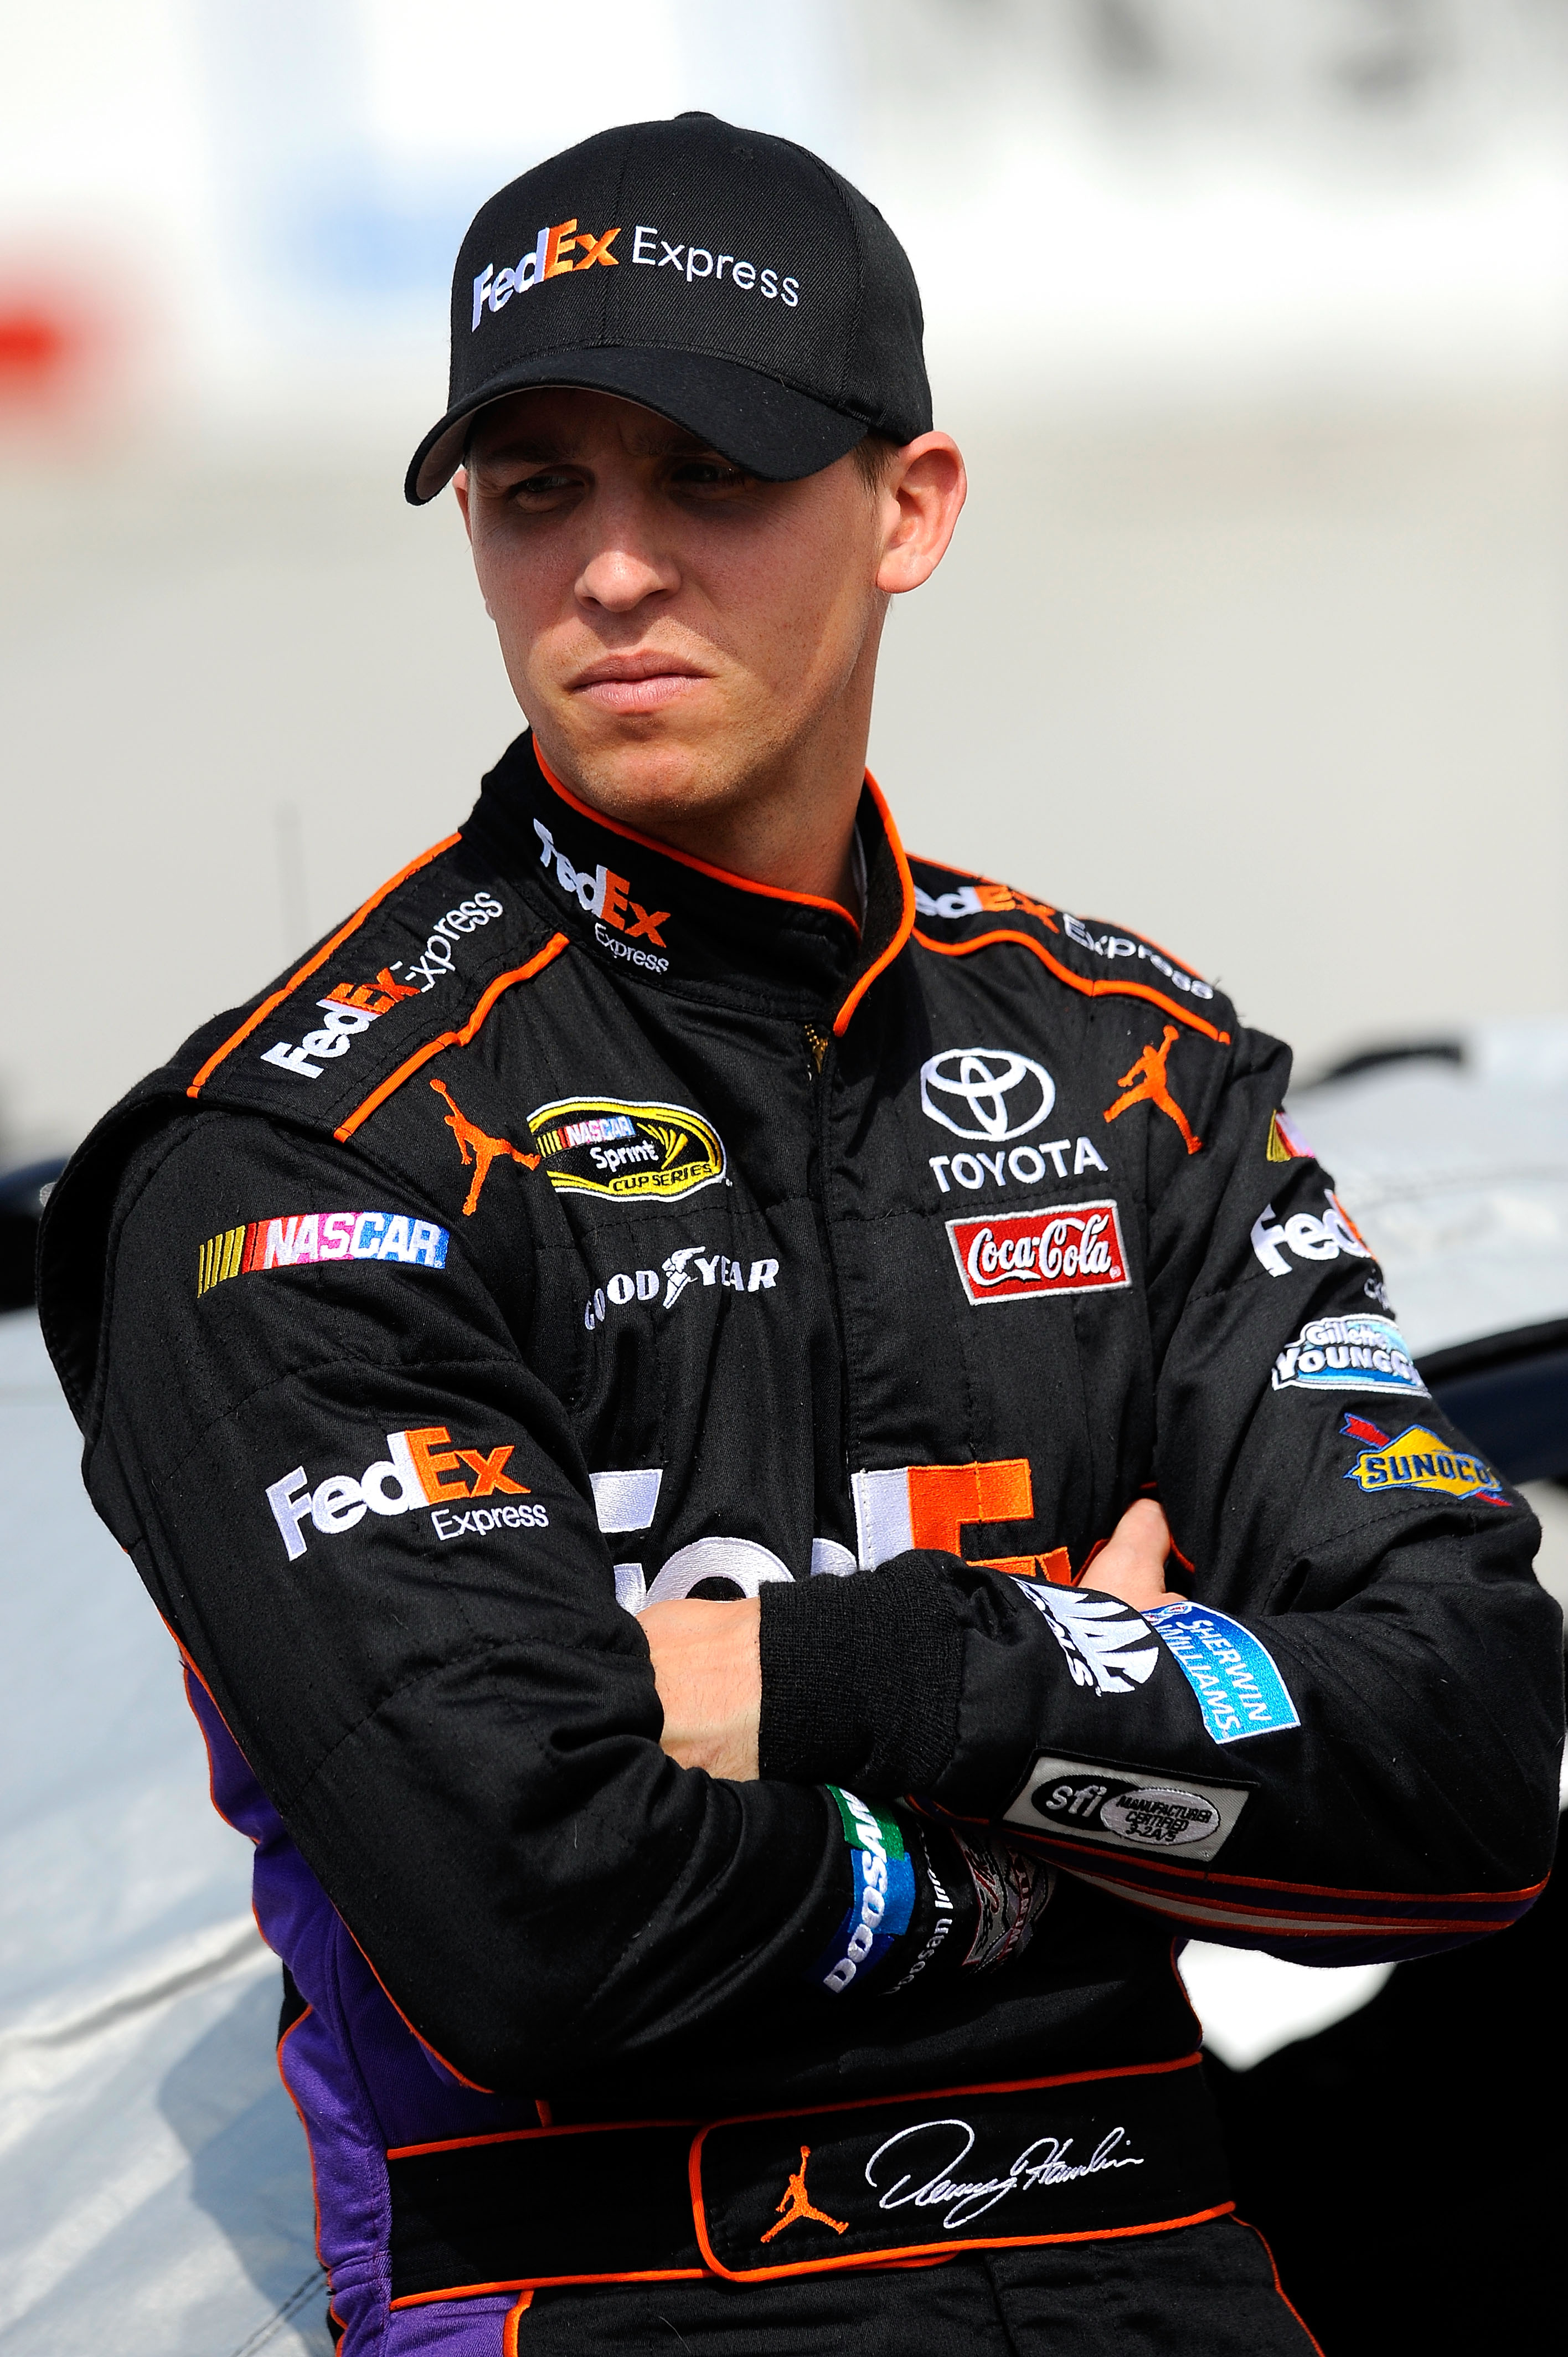 BRISTOL, TN - MARCH 18:  Denny Hamlin, driver of the #11 FedEx Express Toyota, stands on the grid prior to qualifying for the NASCAR Sprint Cup Series Jeff Byrd 500 Presented By Food City at Bristol Motor Speedway on March 18, 2011 in Bristol, Tennessee.